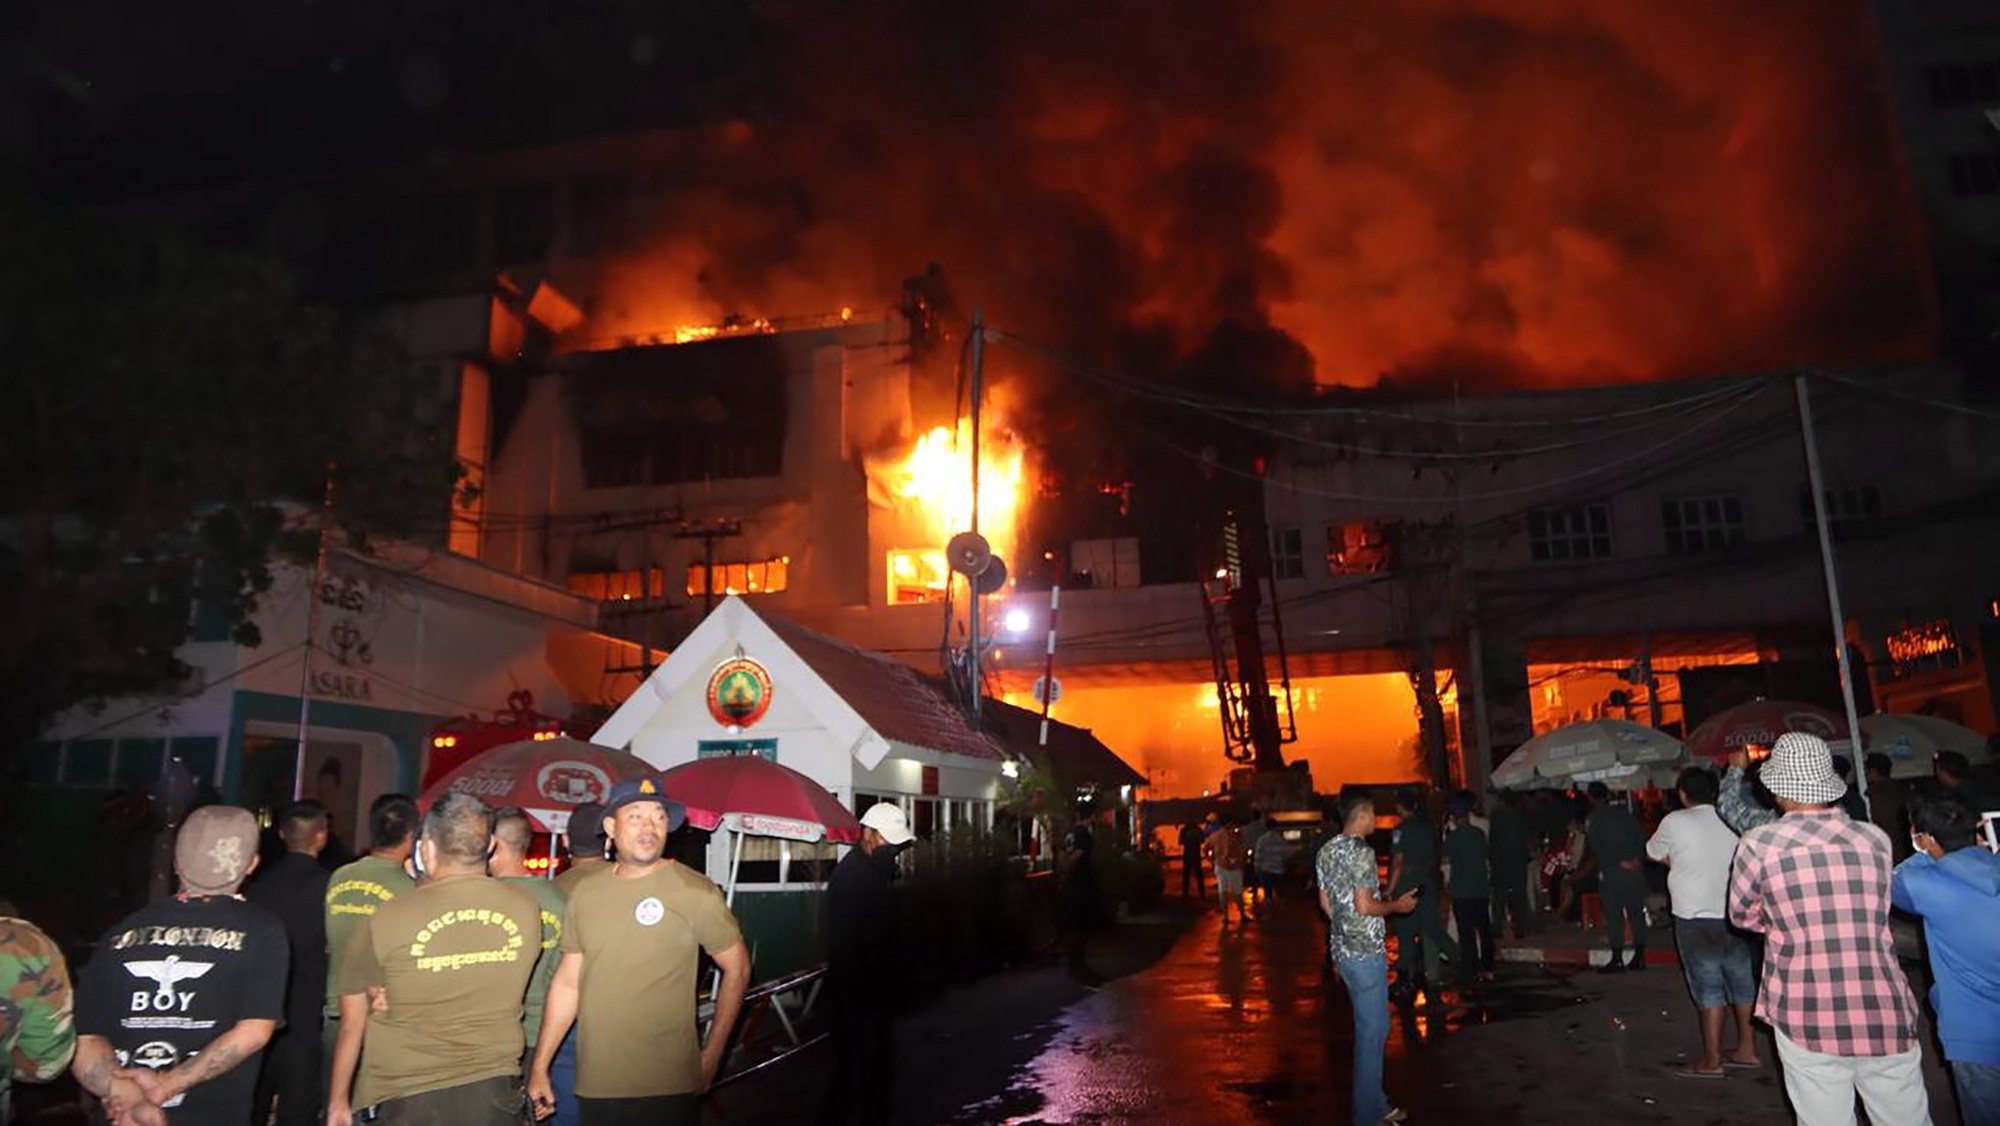 epa10381184 Firefighters at the scene of a major fire burning through the Grand Diamond City hotel-casino in Poipet, Banteay Meanchey province, Cambodia, 29 December 2022. At least 10 people were killed and more than 100 injured after a fire broke out at the hotel-casino in the border town of Poipet late in the night of 28 December, local authorities reported.  EPA/STRINGER -- BEST QUALITY AVAILABLE